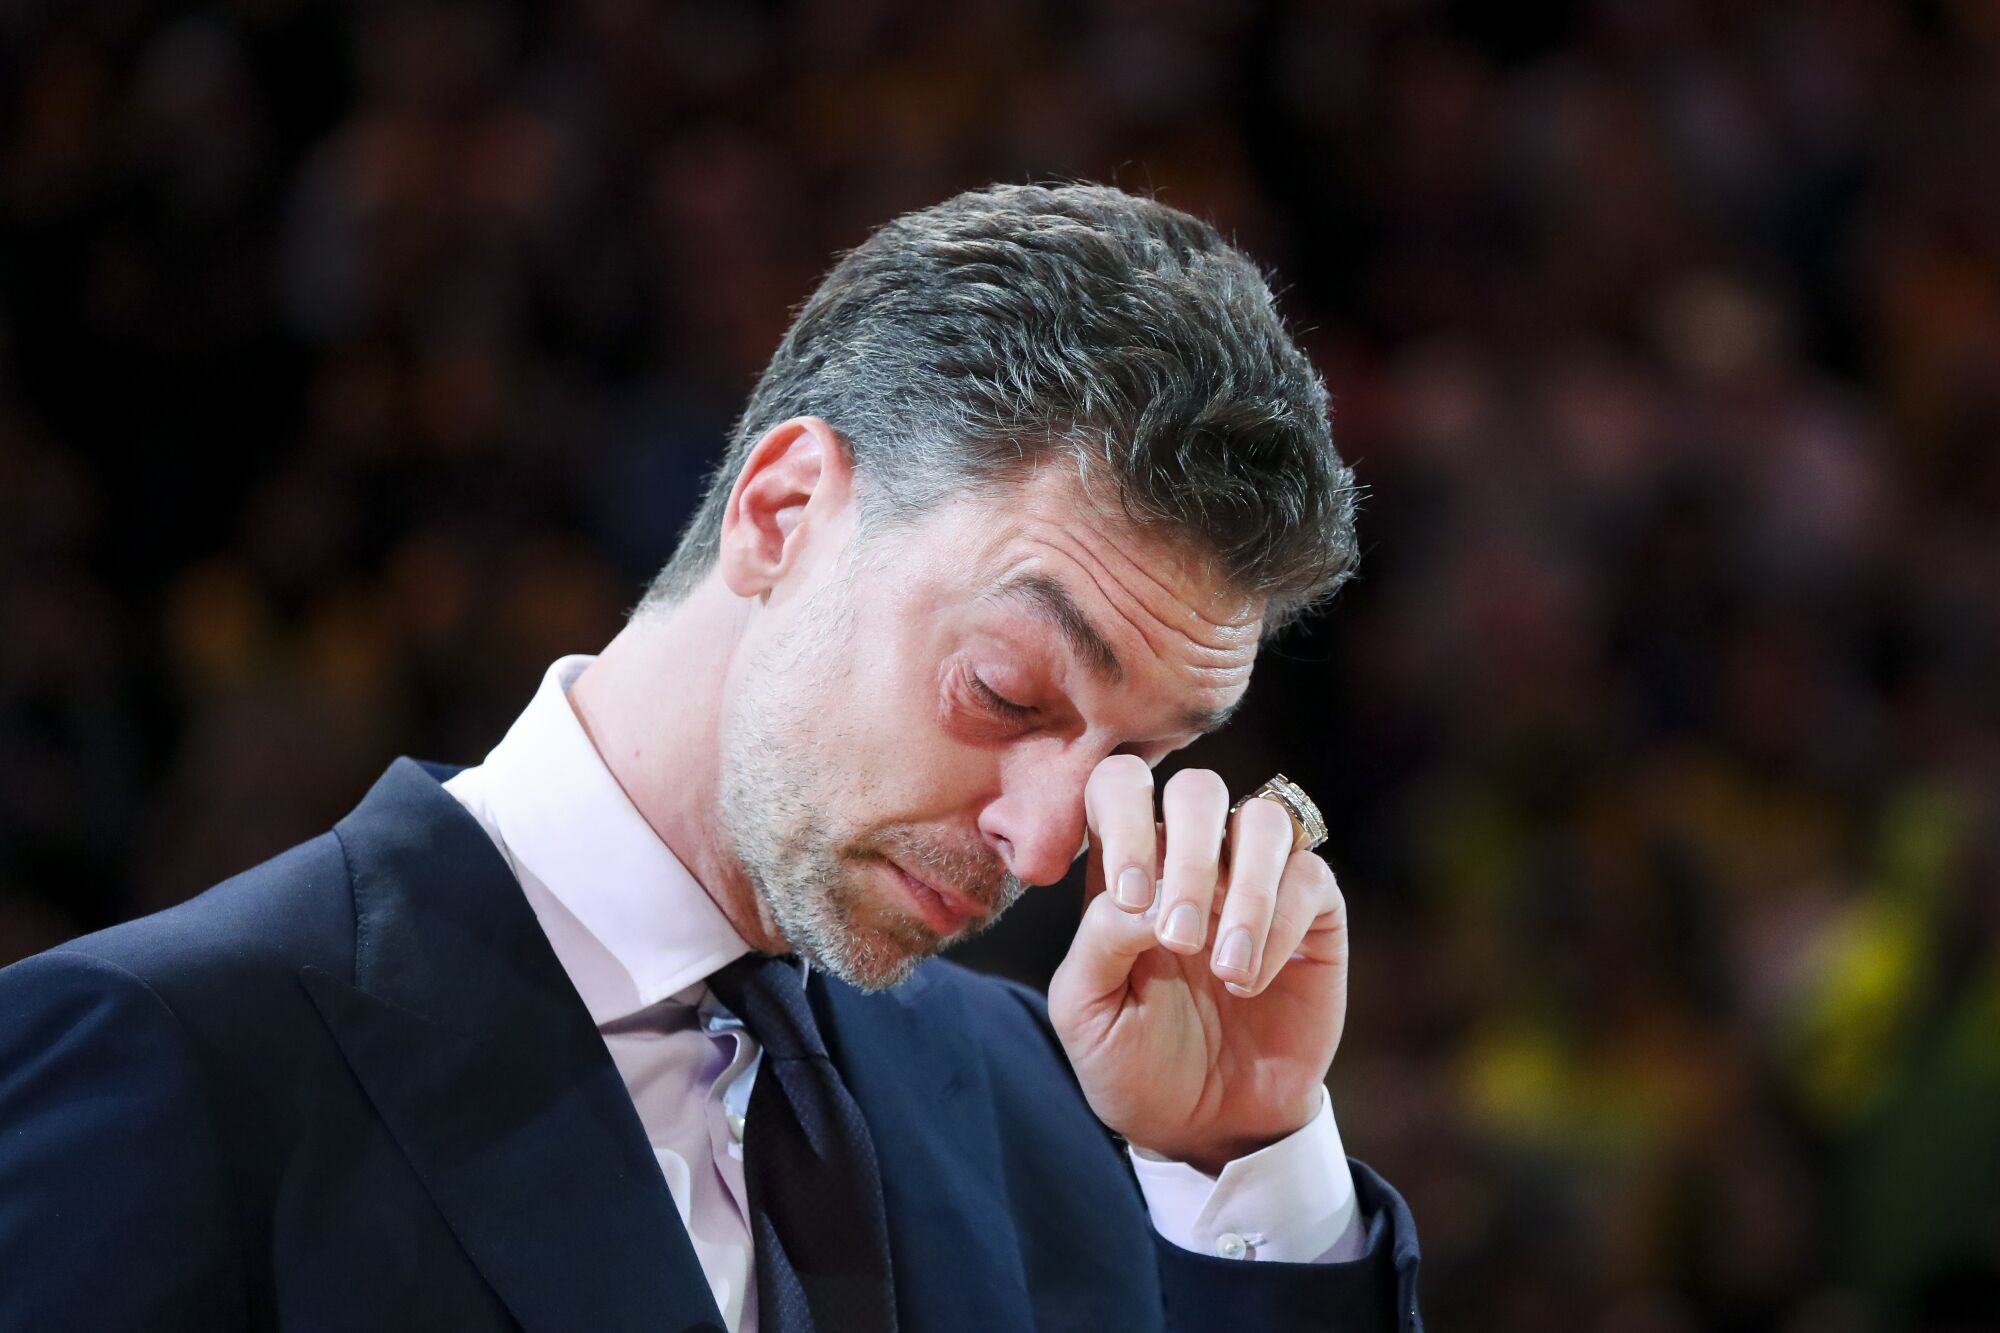 Pau Gasol wipes away tears after retiring his jersey during Tuesday's halftime ceremony.